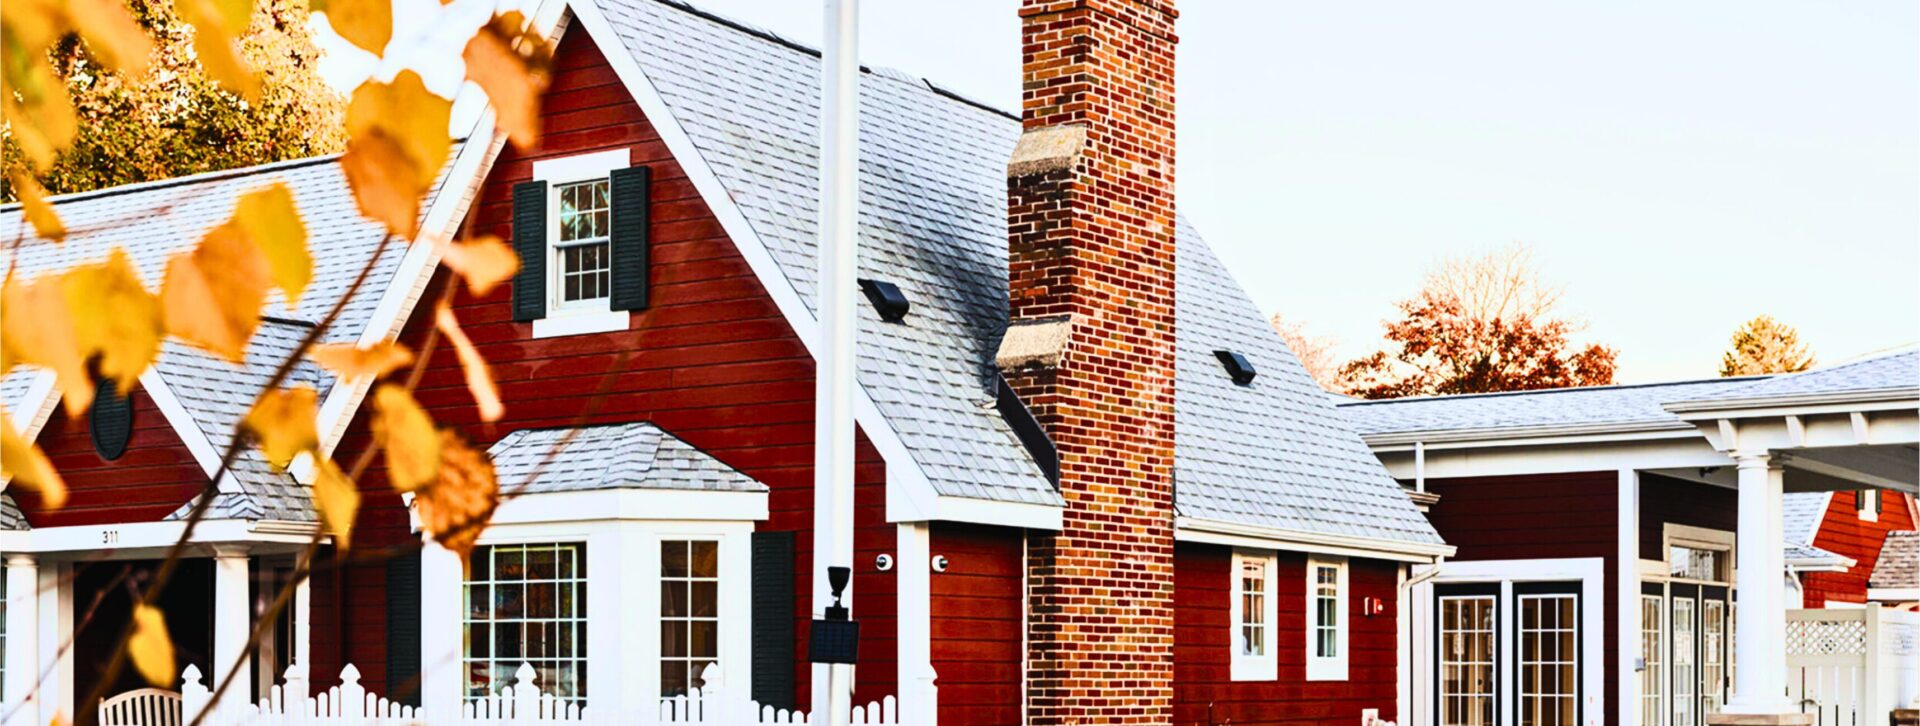 Outside of The Little Red House building showing chimney, red siding, white trim, shingles on the roof, and black shutters on the windows.